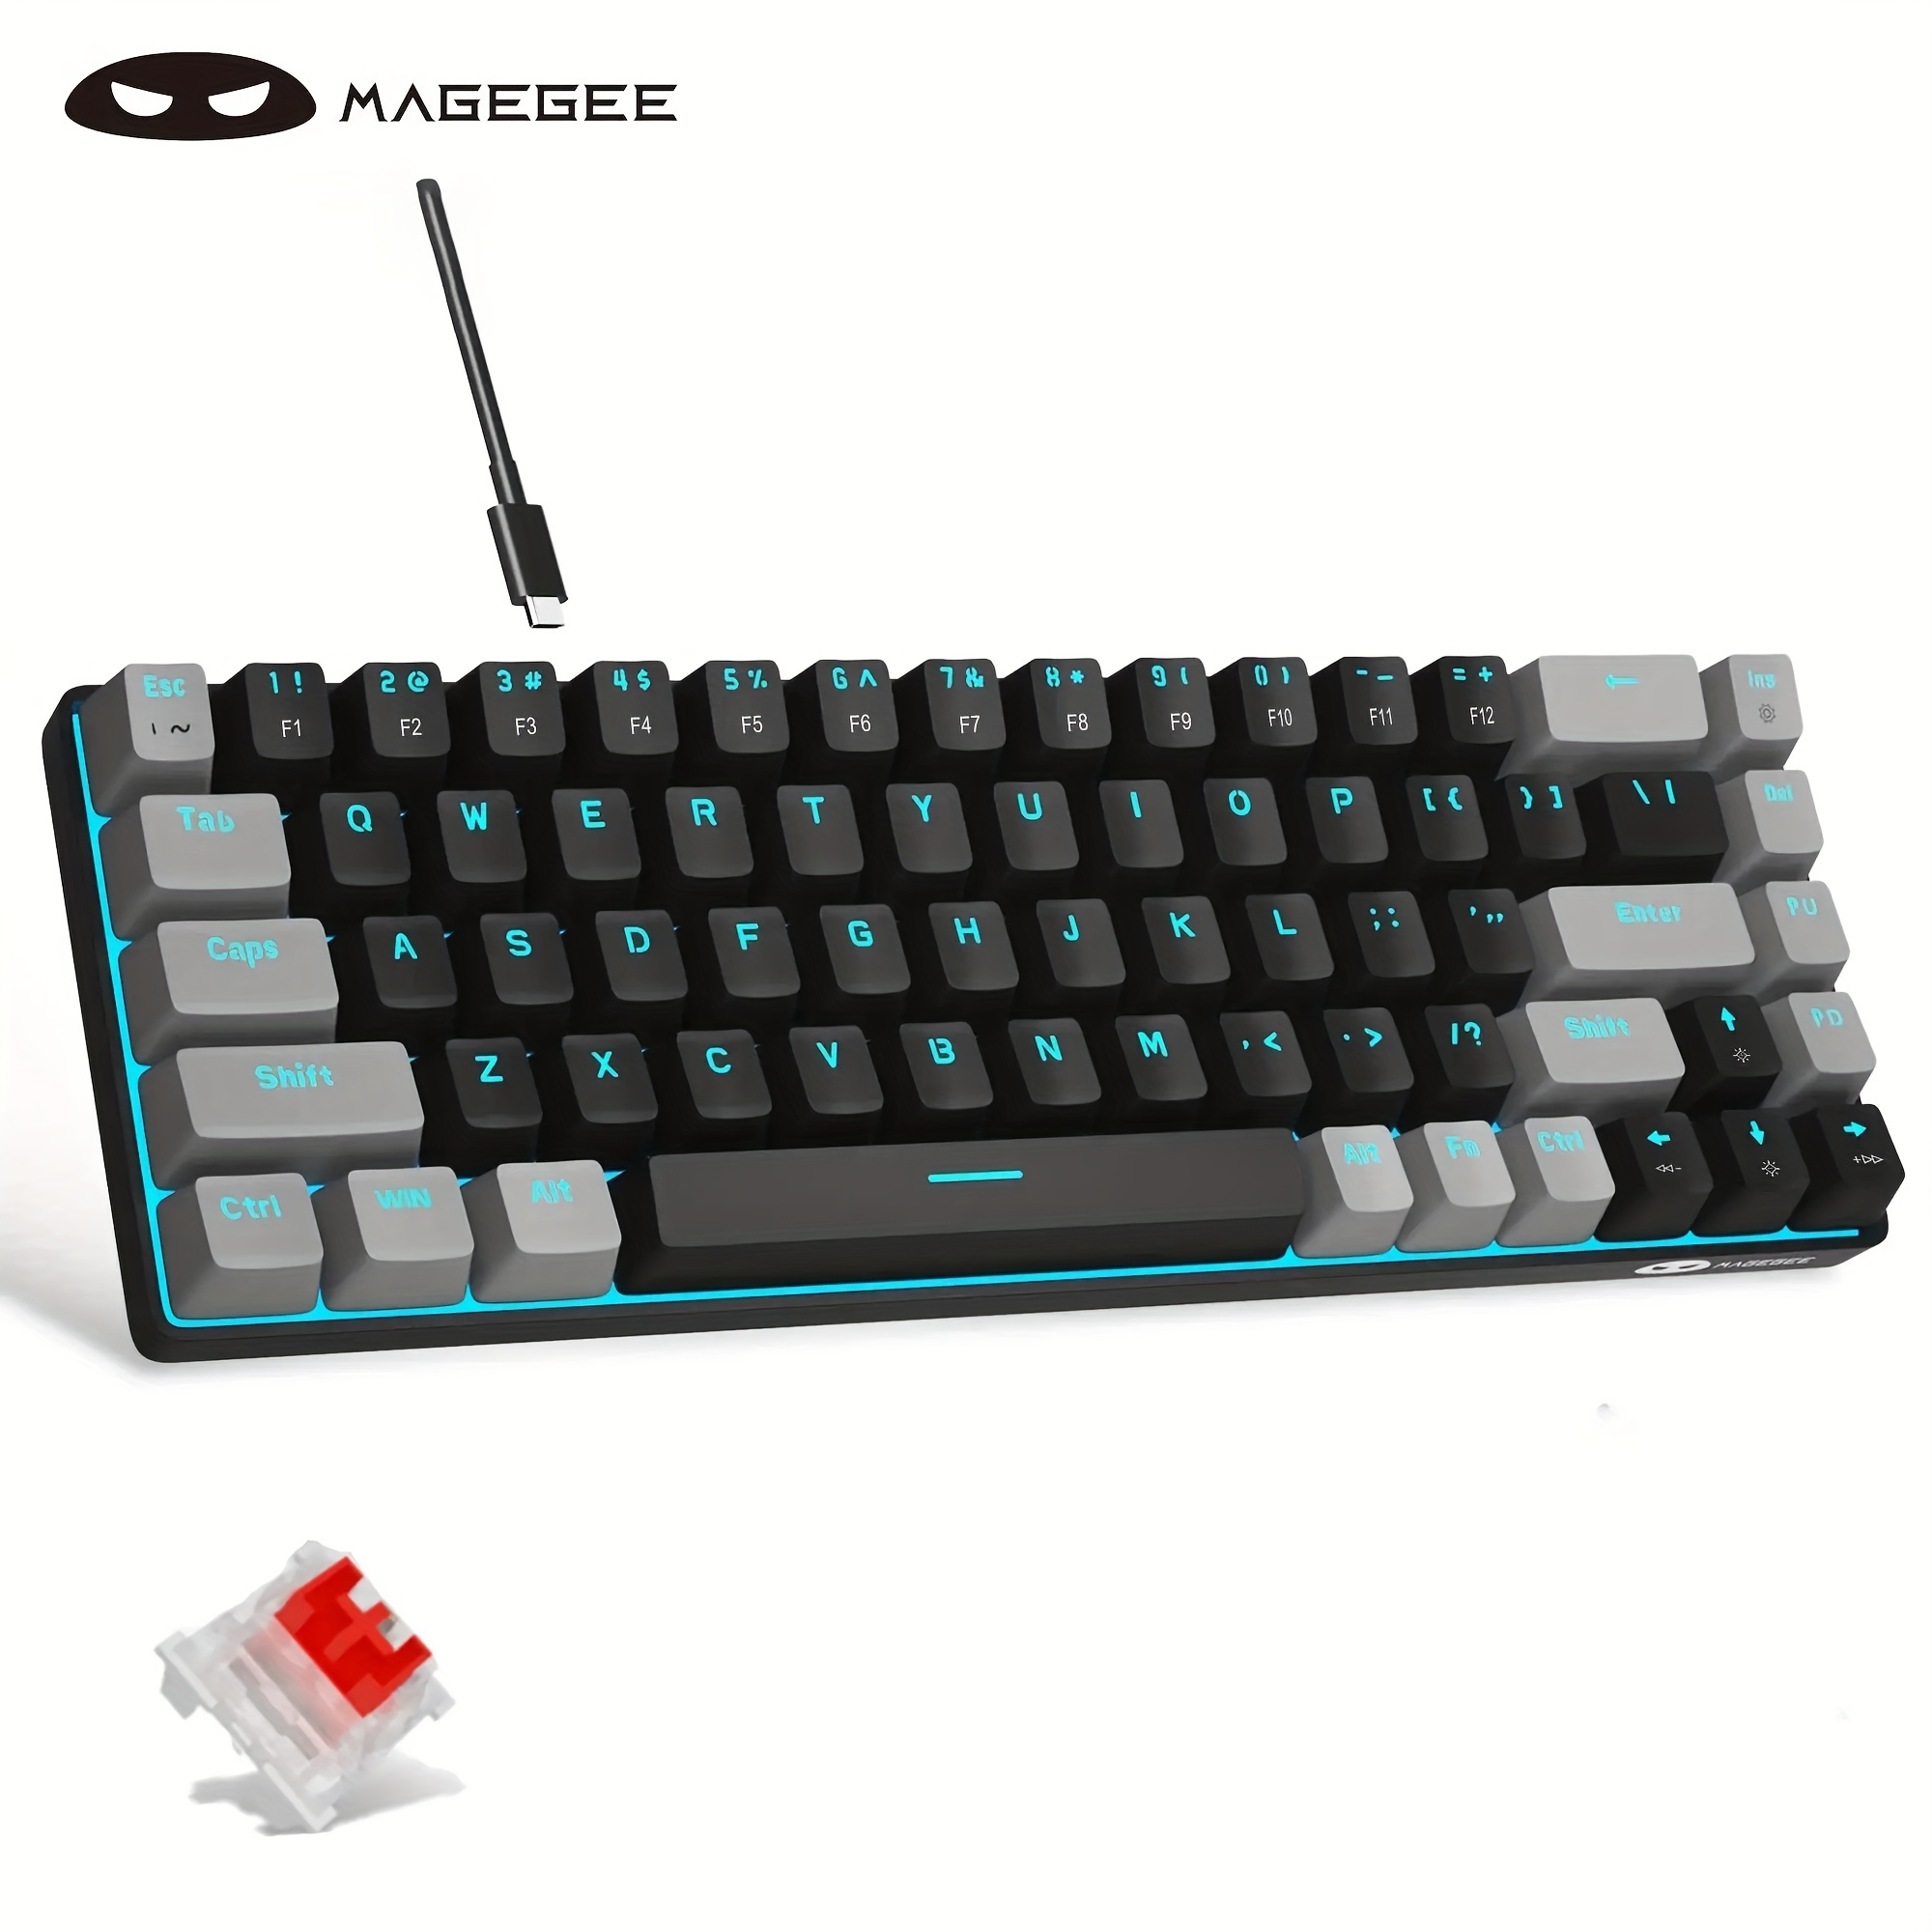 

Magegee Portable 60% Mechanical Gaming Keyboard, Mk-box Led Backlit Compact 68 Keys Mini Wired Office Keyboard With Red Switch For Windows Laptop Pc - Grey/black